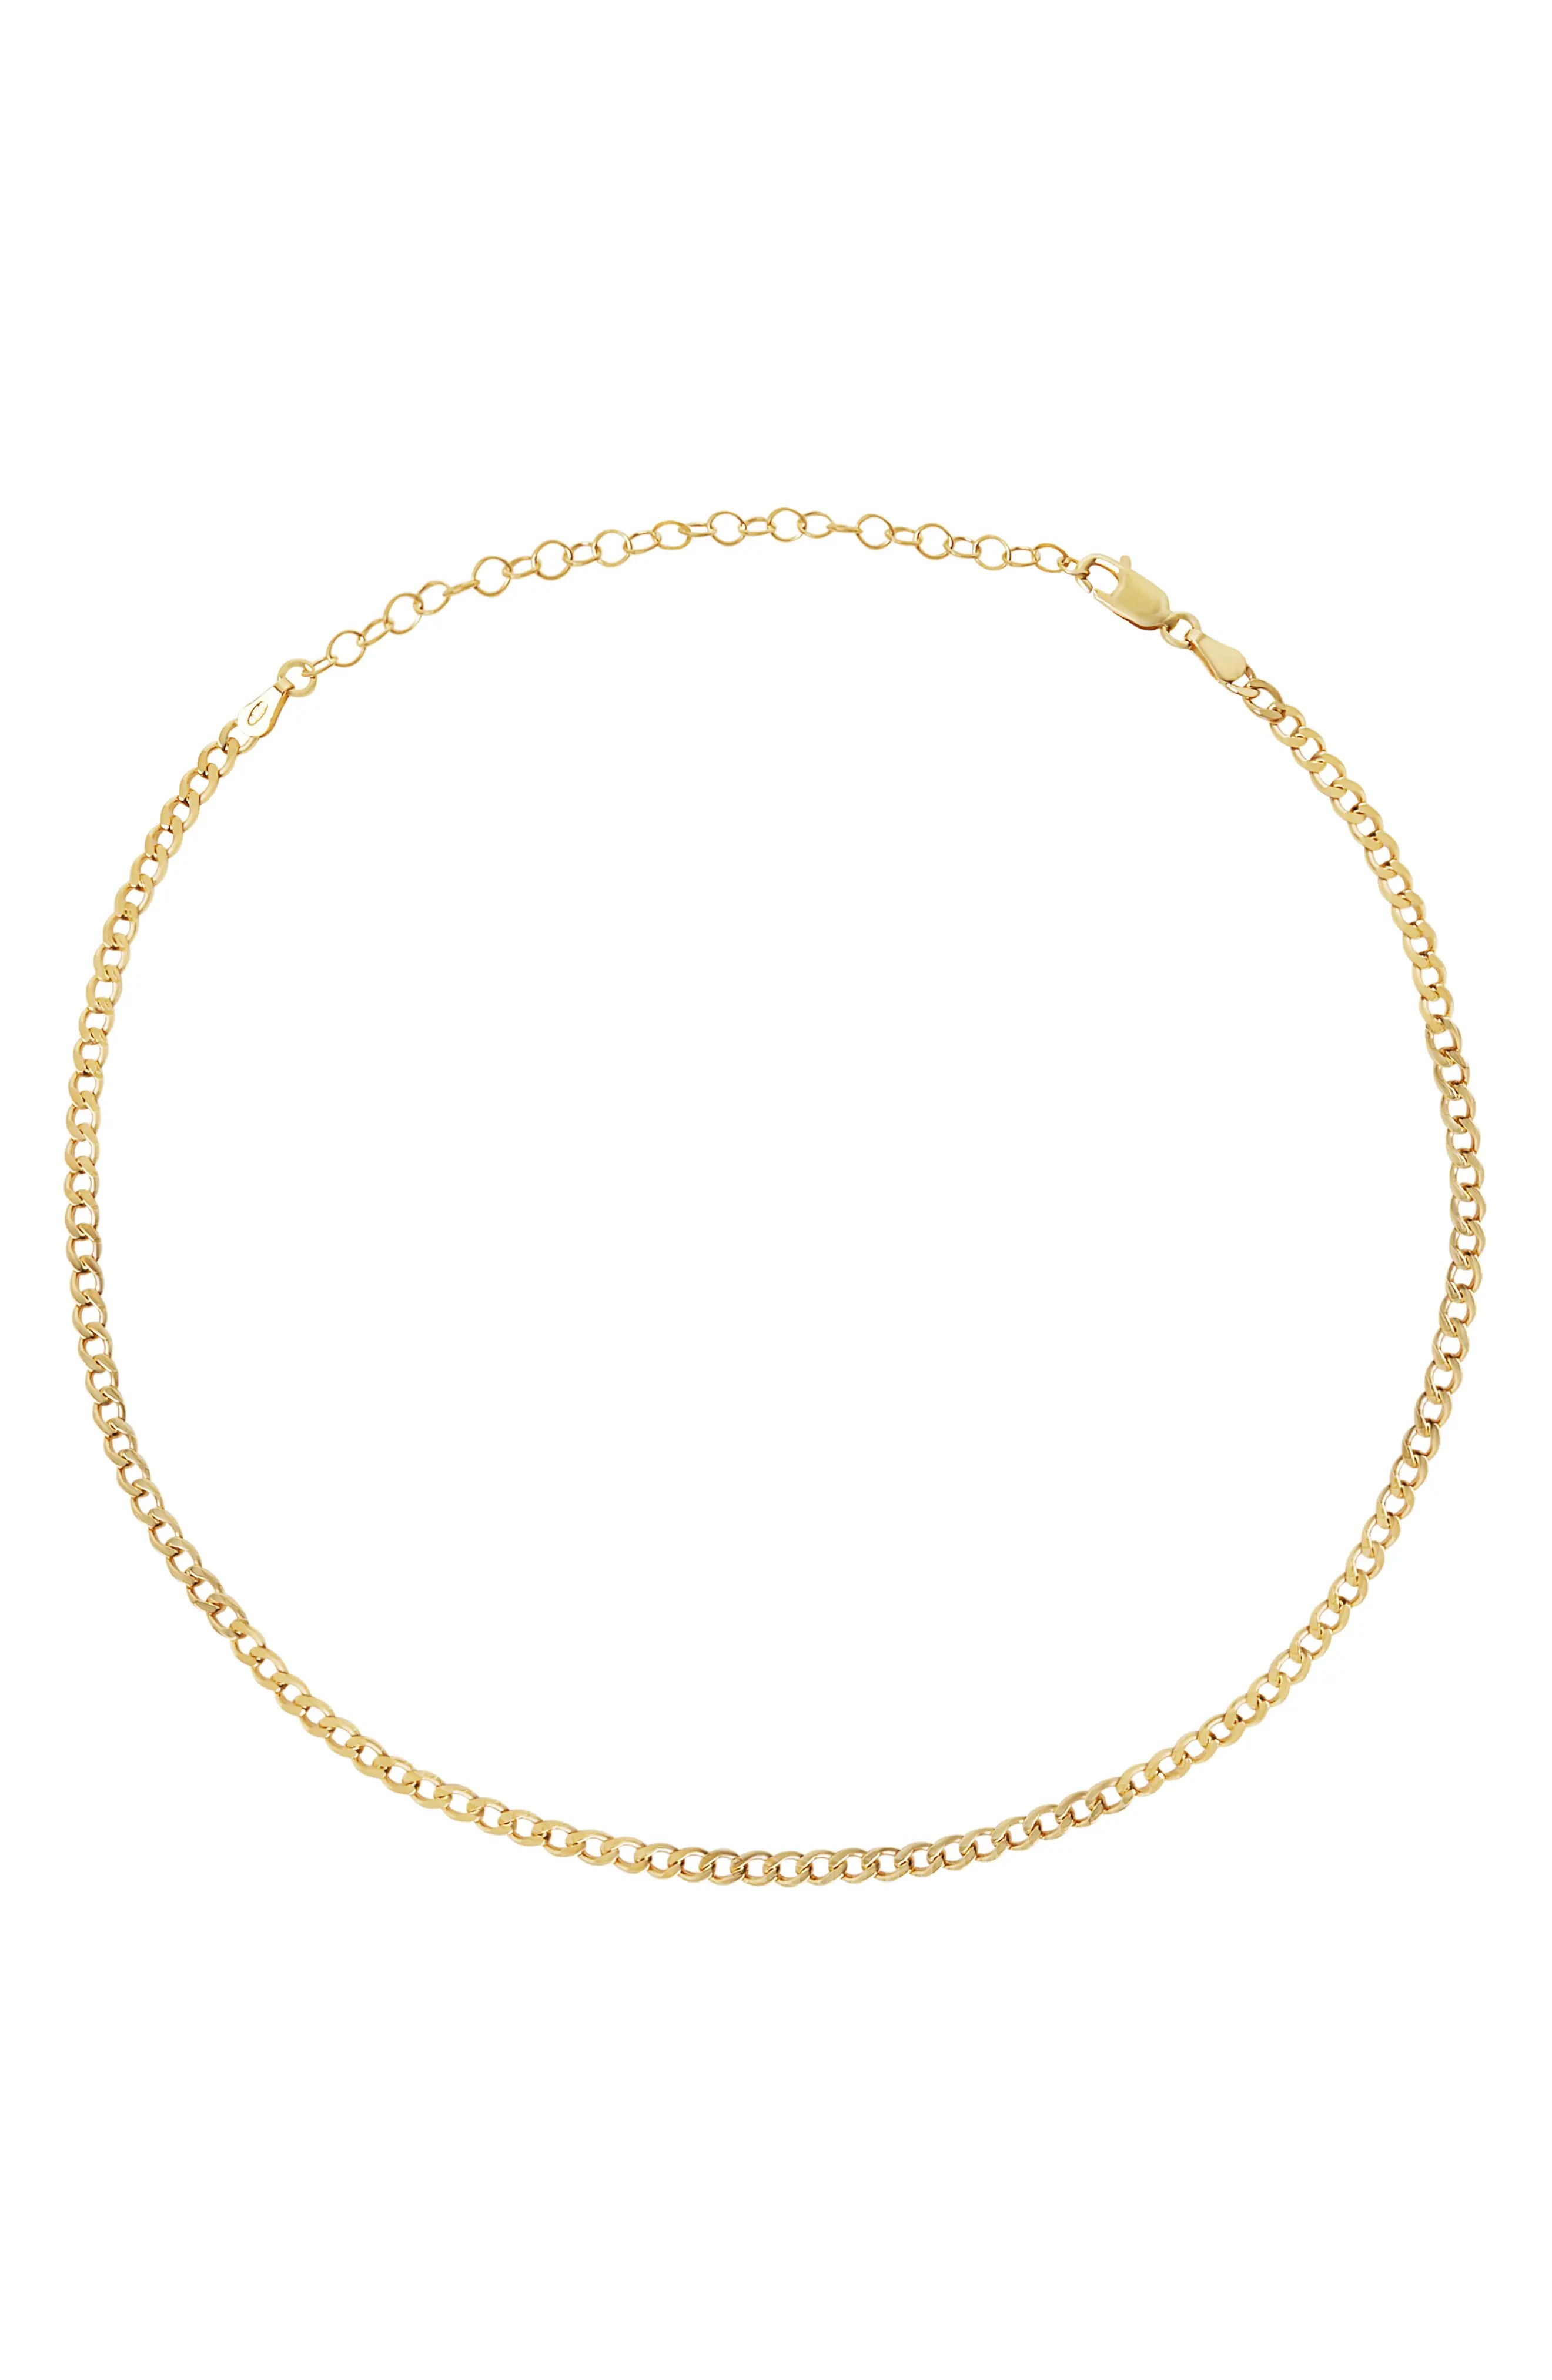 The M Jewelers The Curb Chain Choker in Gold at Nordstrom | Nordstrom